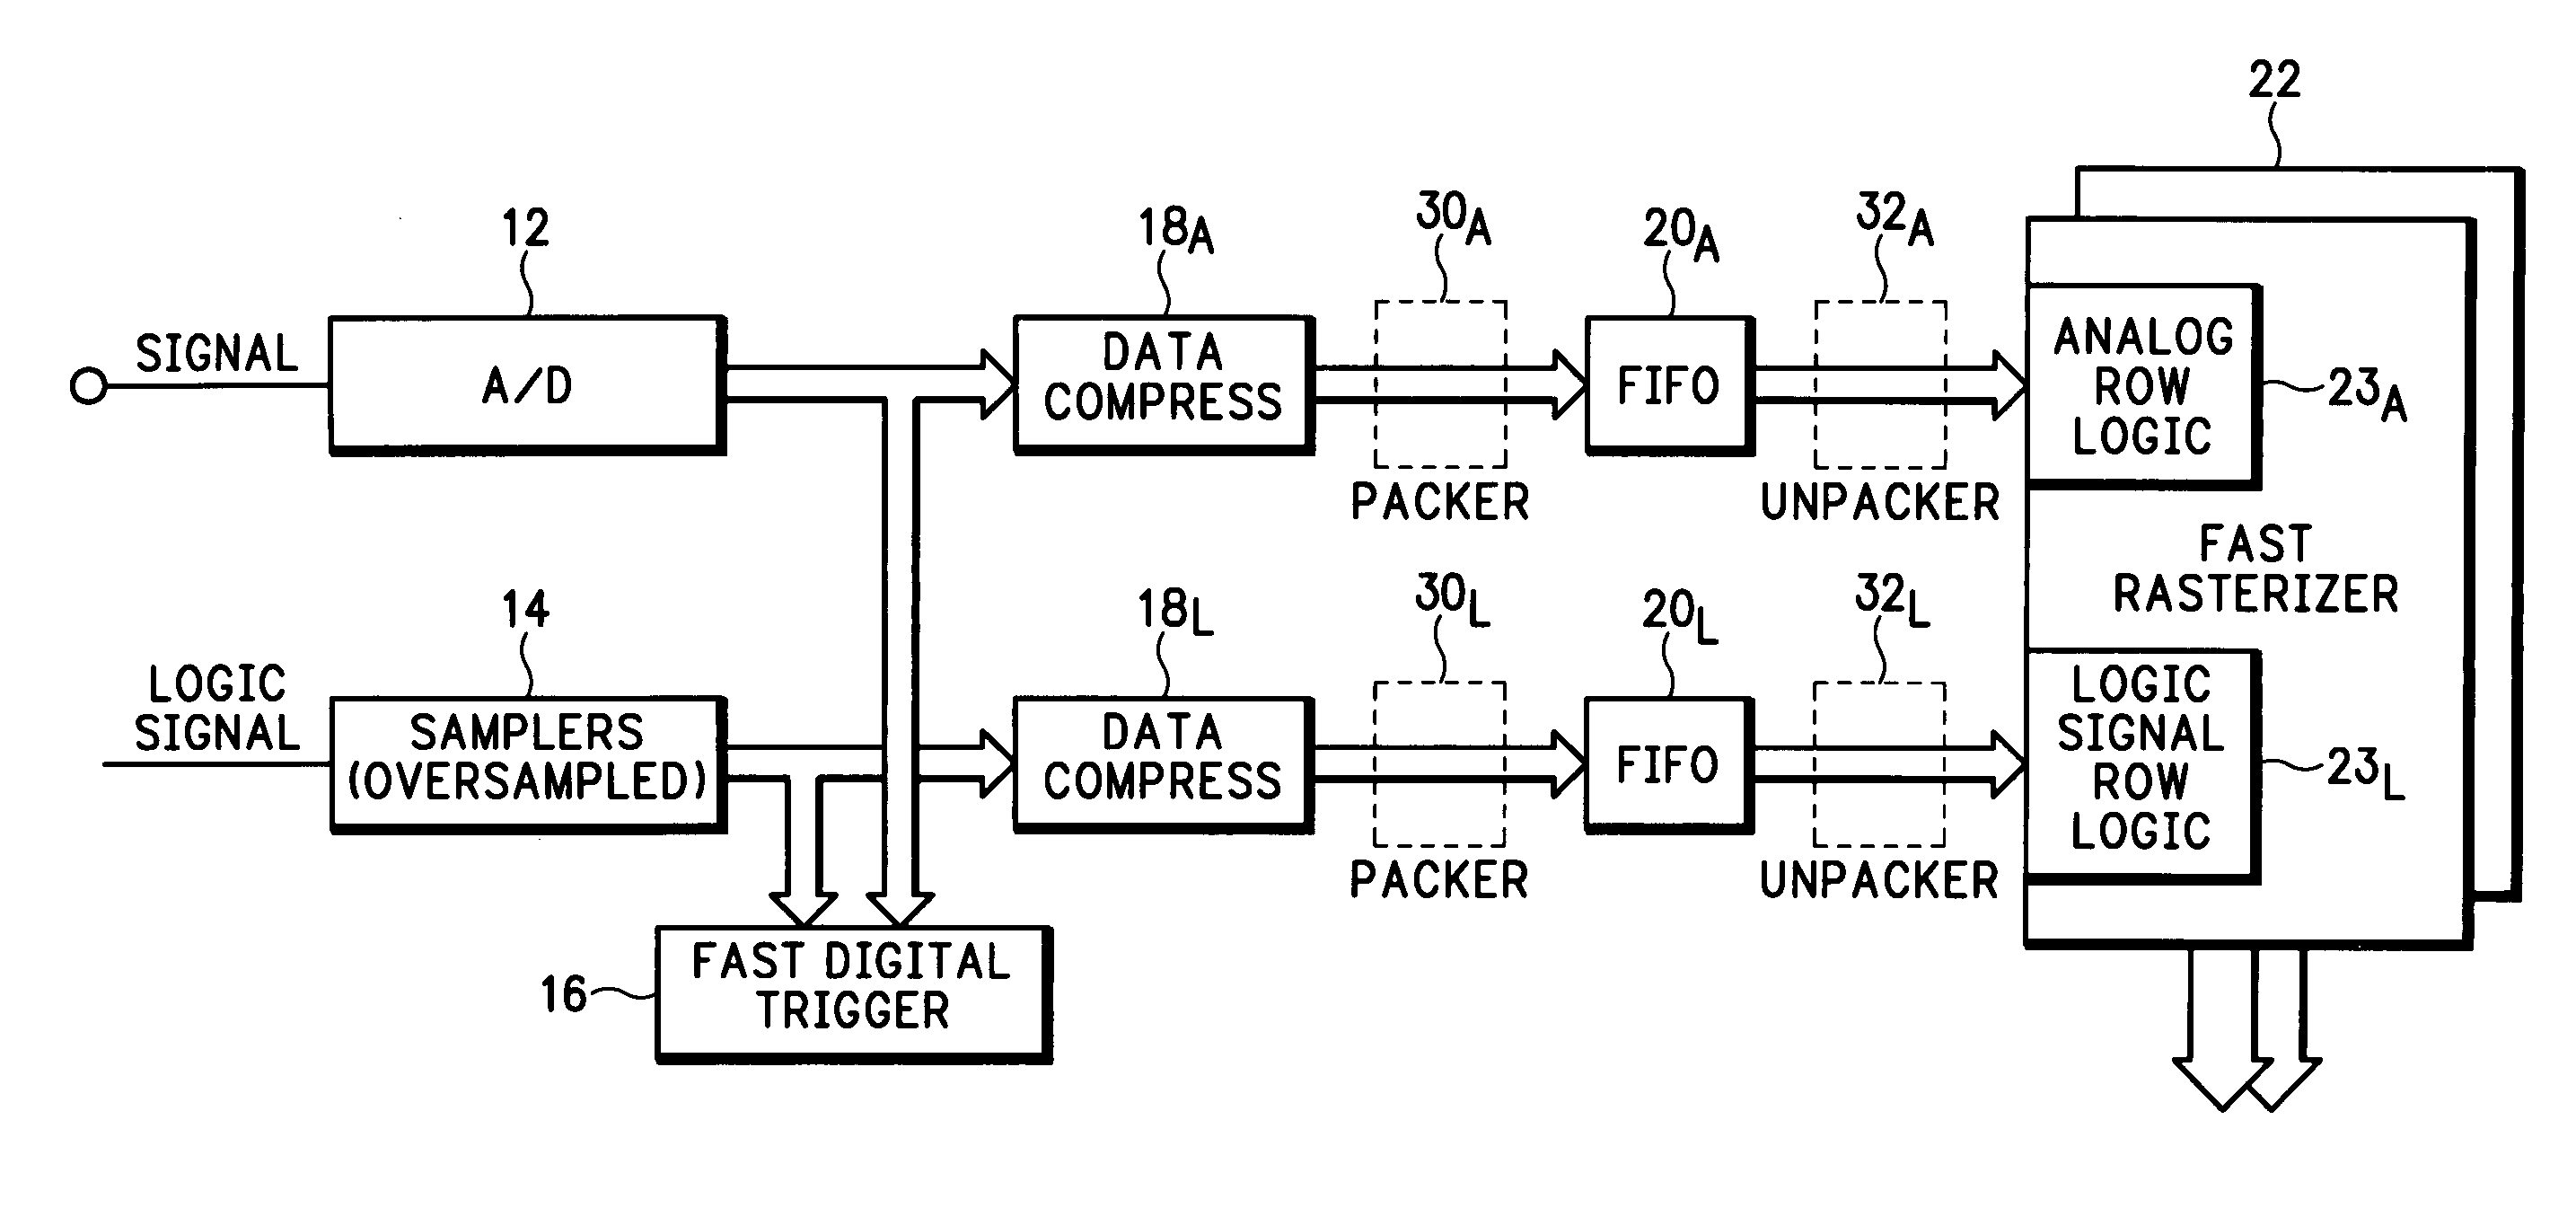 Mixed signal display for a measurement instrument